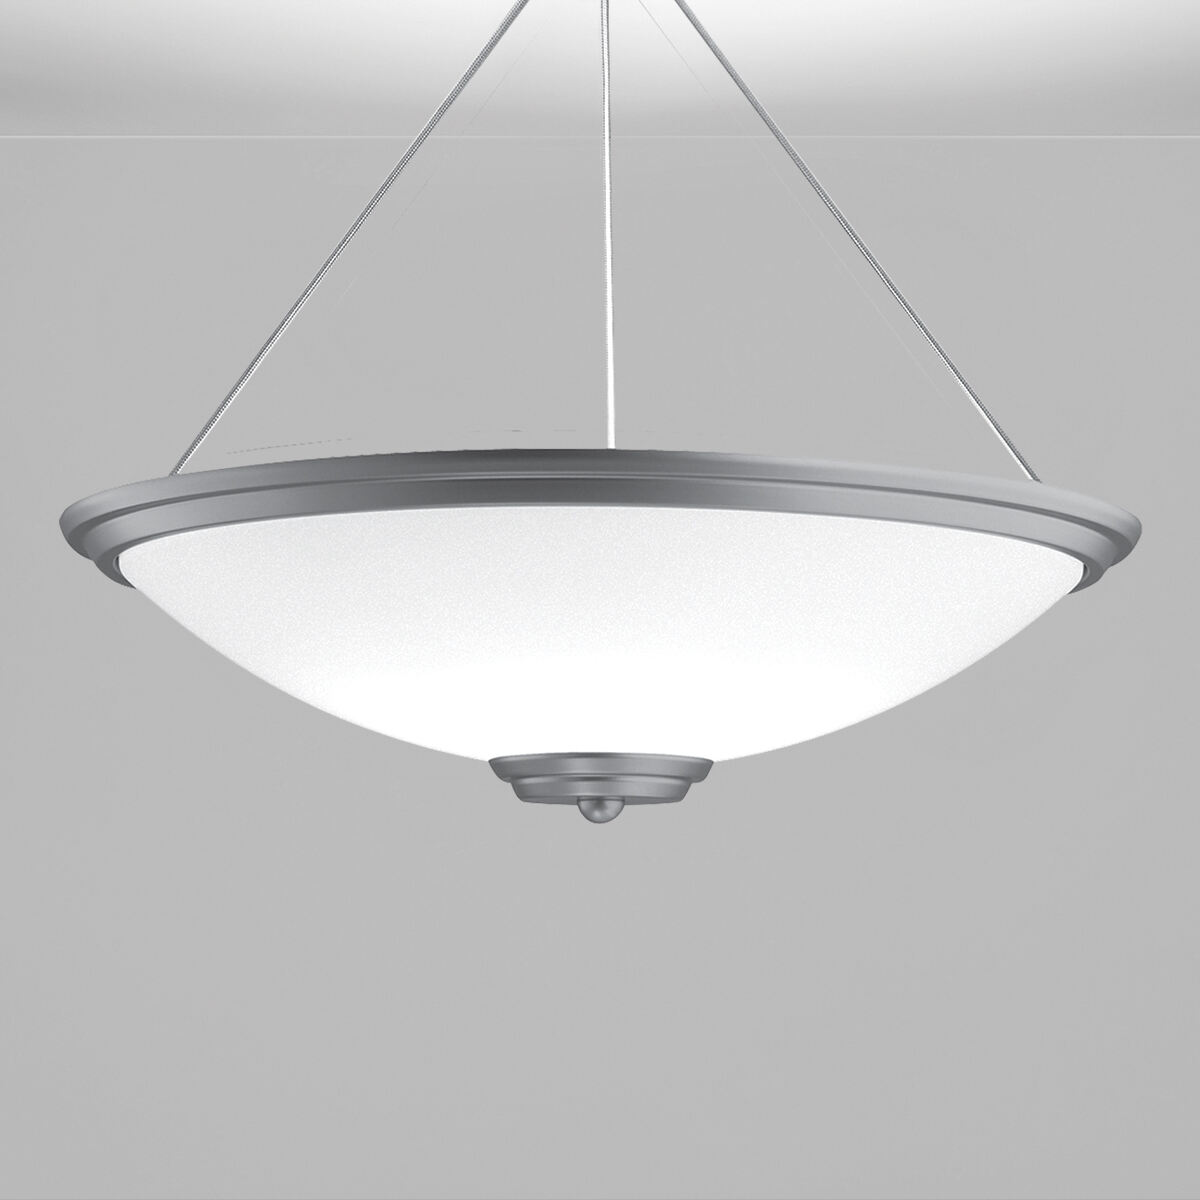 A large bowl pendant suspended with a cable and finial